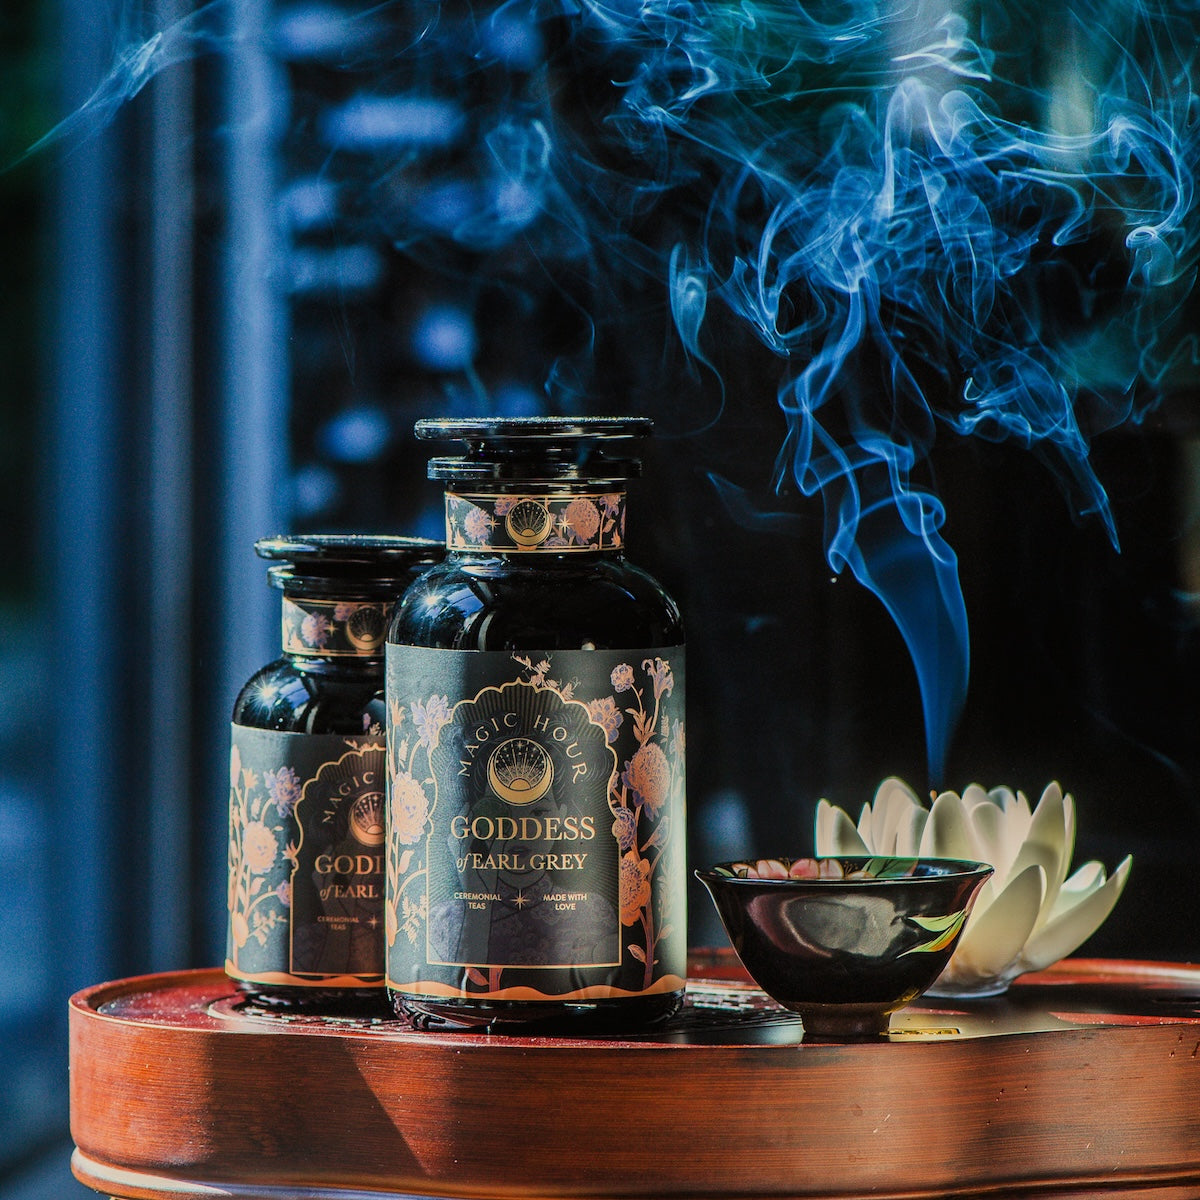 Two dark glass jars labeled &quot;Goddess of Earl: Lady Luck Oriental Beauty Oolong Tea&quot; from Magic Hour are placed on a wooden surface. A small bowl releases smoke, contributing to the serene ambiance. The background is softly blurred, accentuating the aromatic setting of this organic loose leaf tea captured in the image.